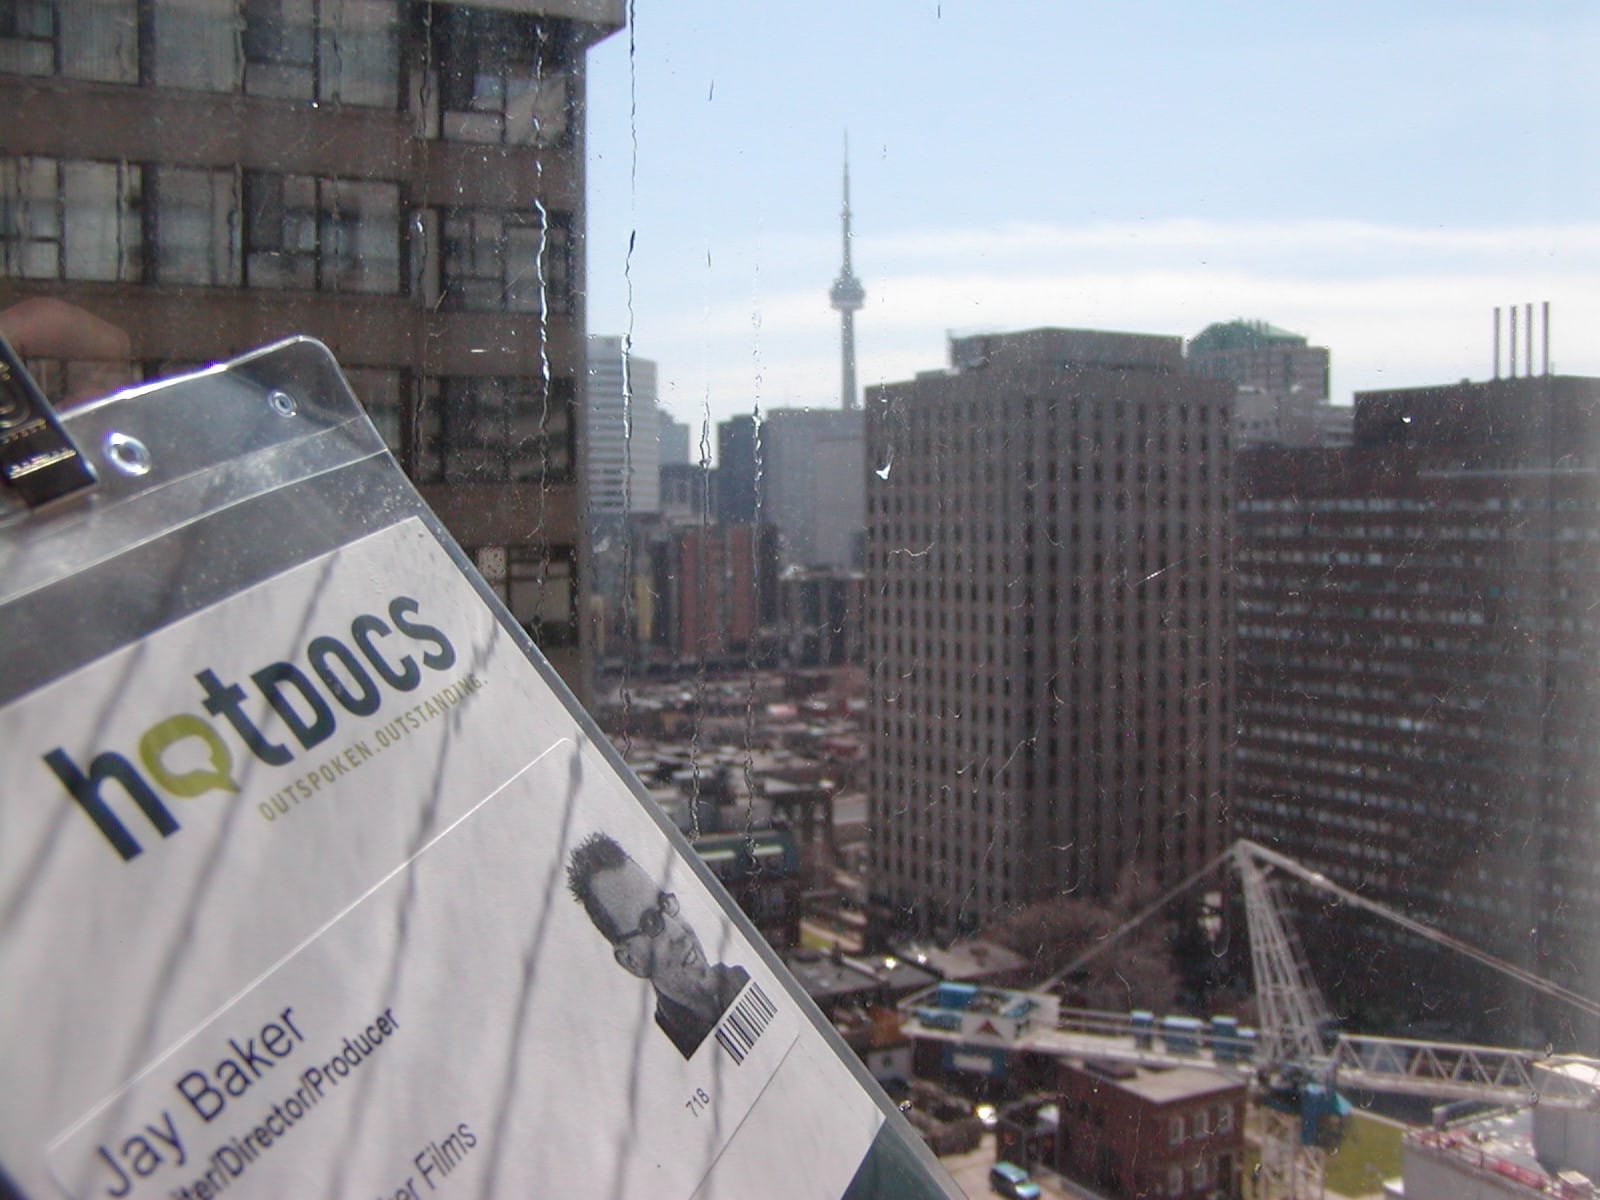 A Hot Docs access pass featuring Jay Baker's name and photo, left in a hotel window with raindrops on it, the CN Tower in the distance